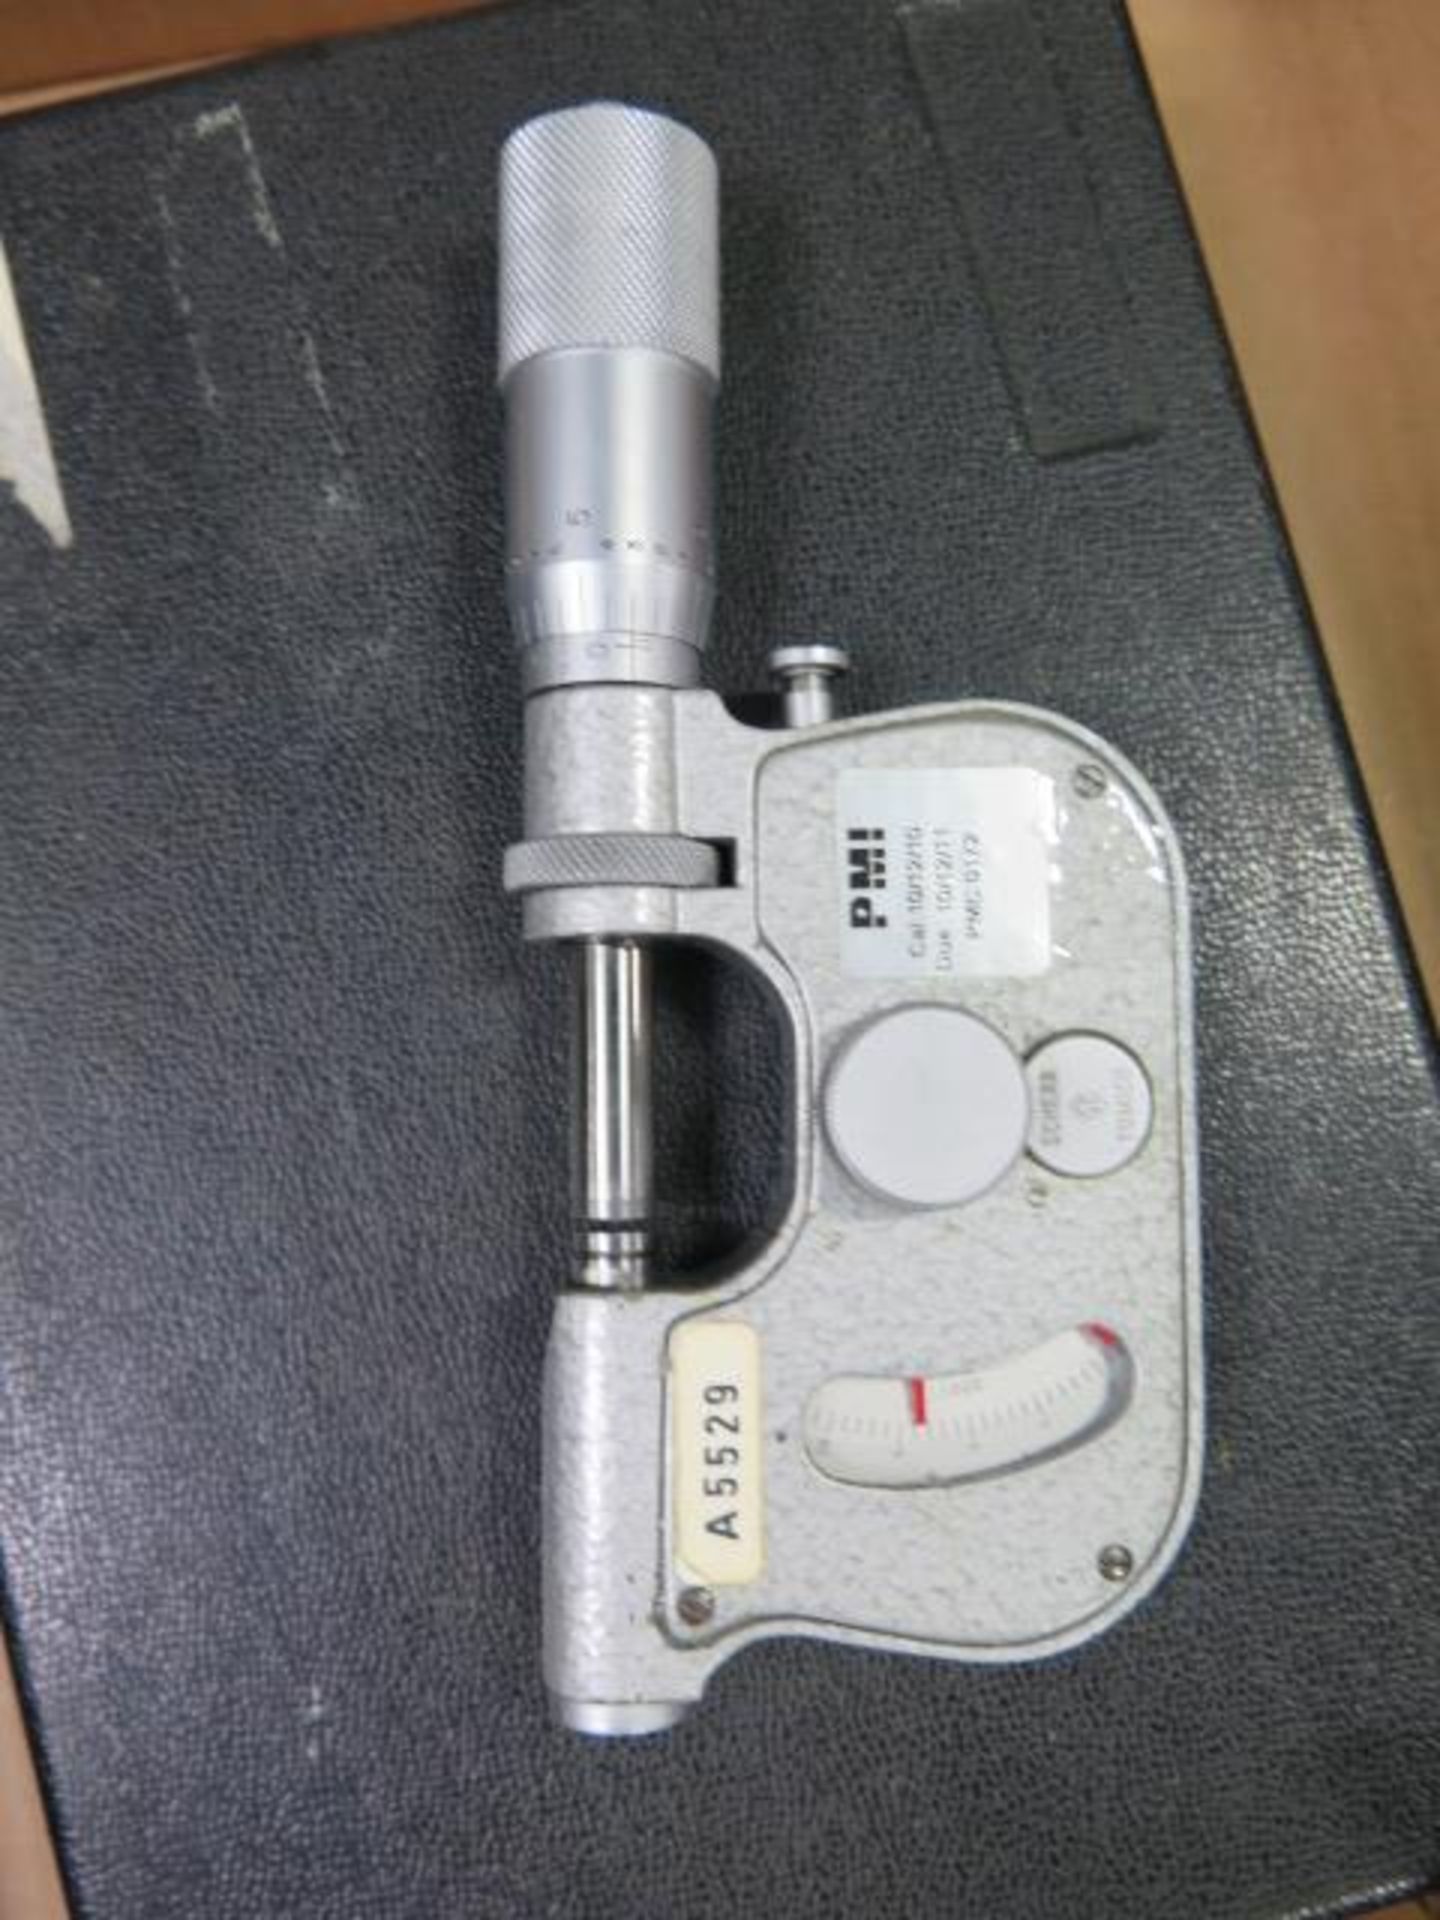 Scherr Tumico 0-1" Indicating OD Mic and Starrett 0-6" Depth Mic (SOLD AS-IS - NO WARRANTY) - Image 3 of 4